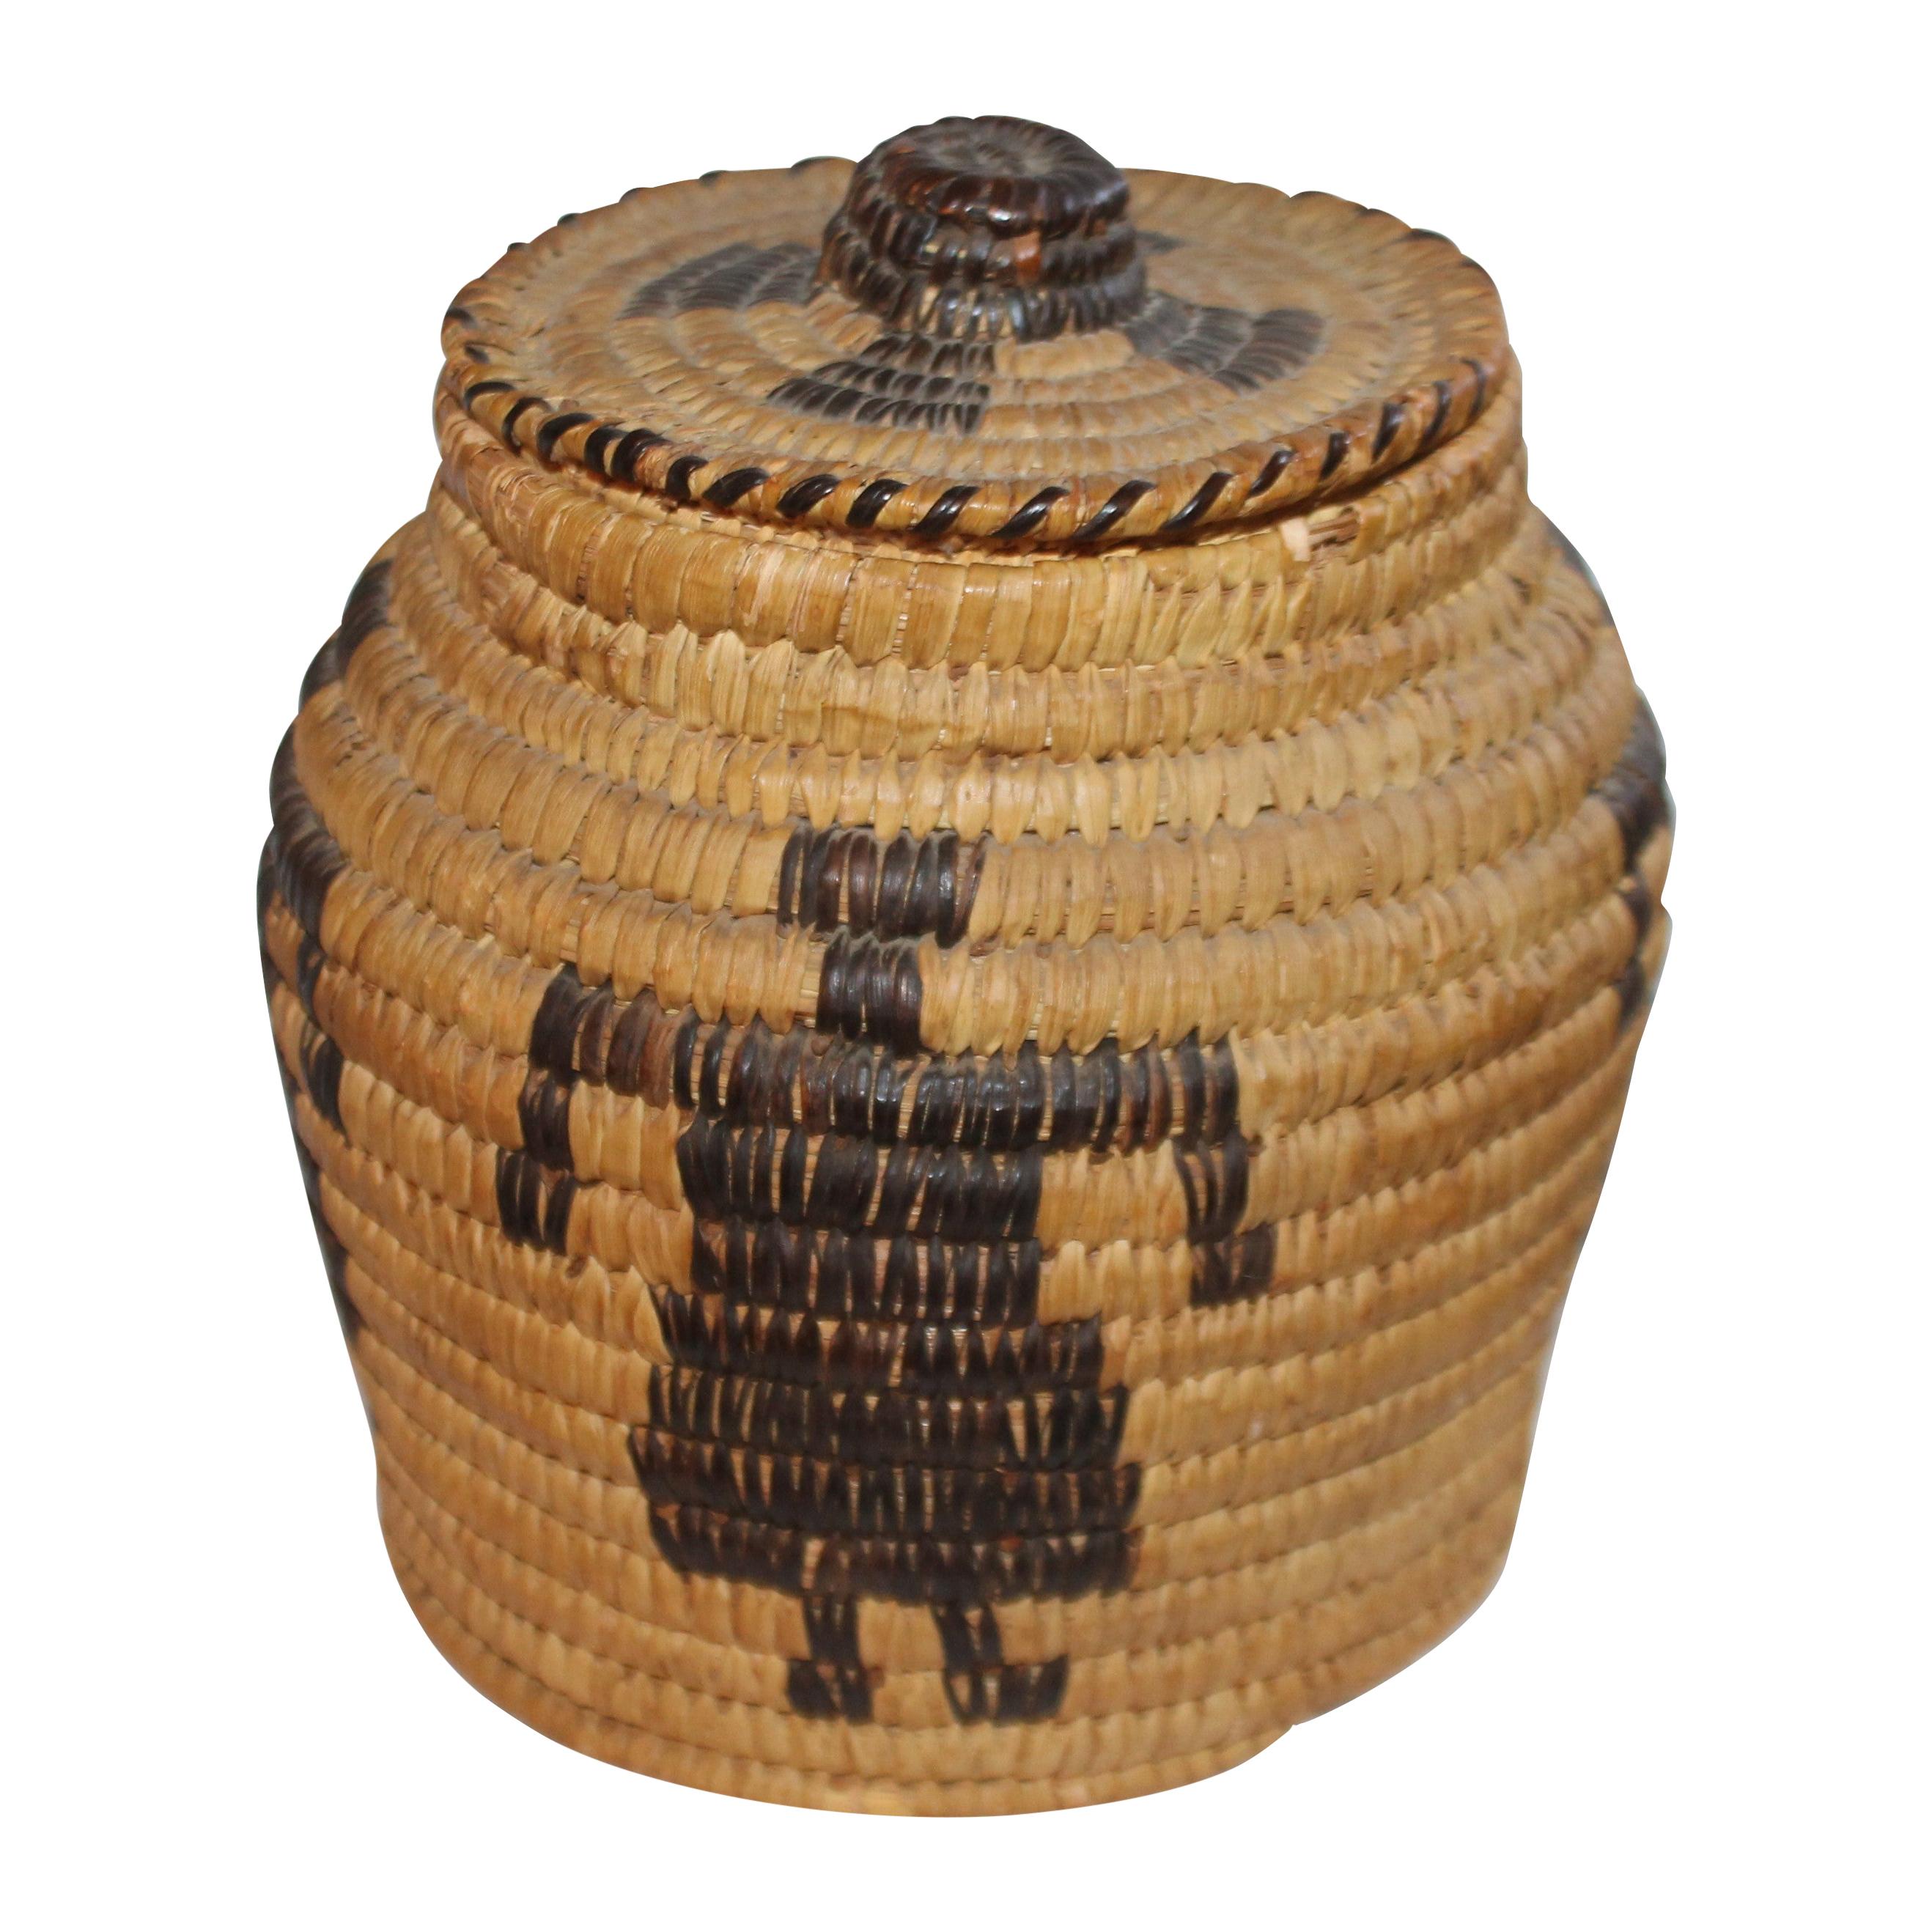 Papago Indian Pictorial Lidded Basket